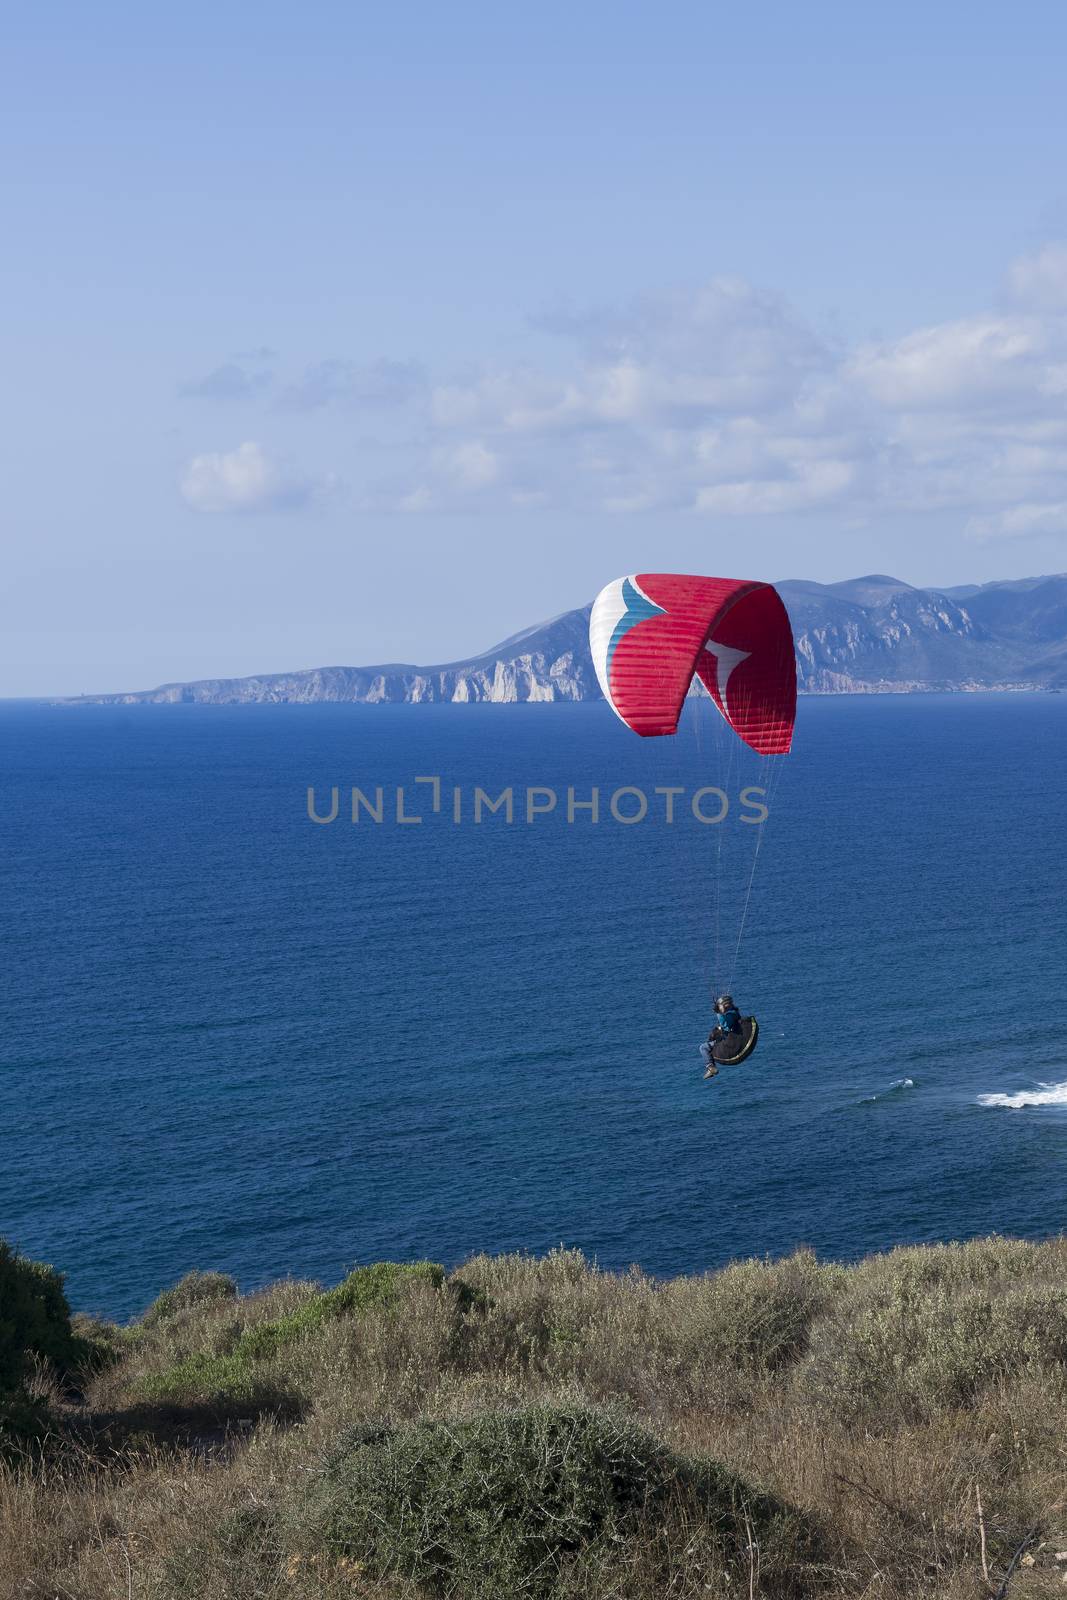 Colorful hang glider in sky over blue sea 